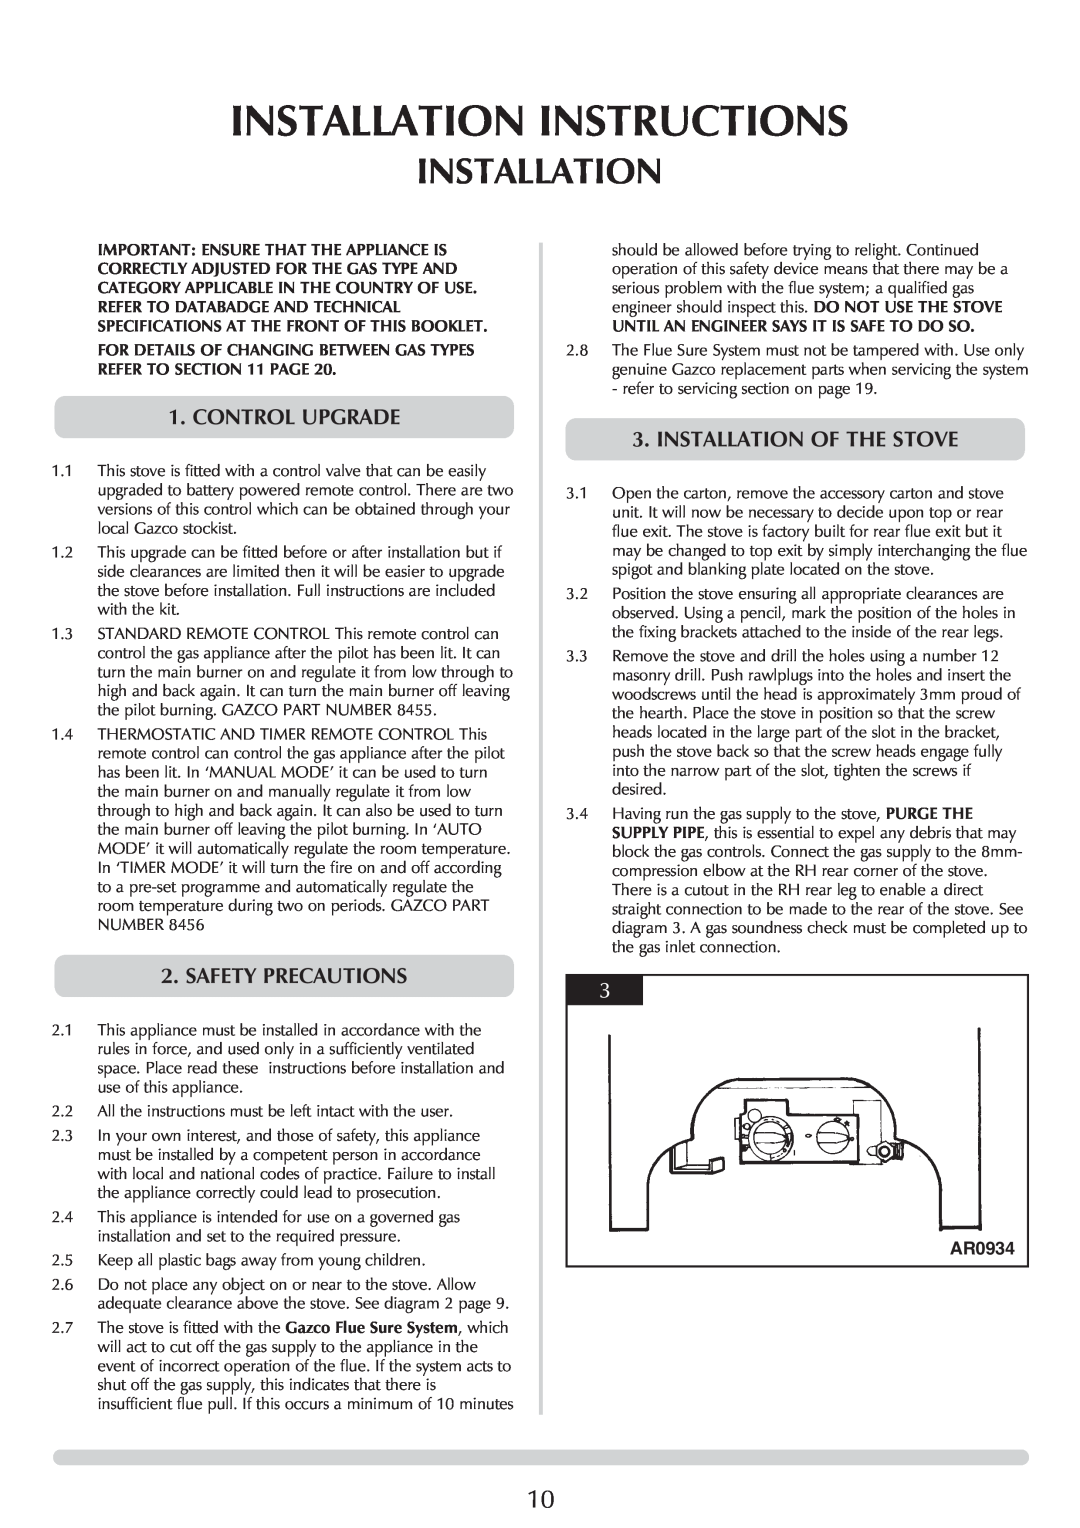 Stovax 5 manual Installation Instructions, Control Upgrade, Safety Precautions, Installation Of The Stove, AR0934 